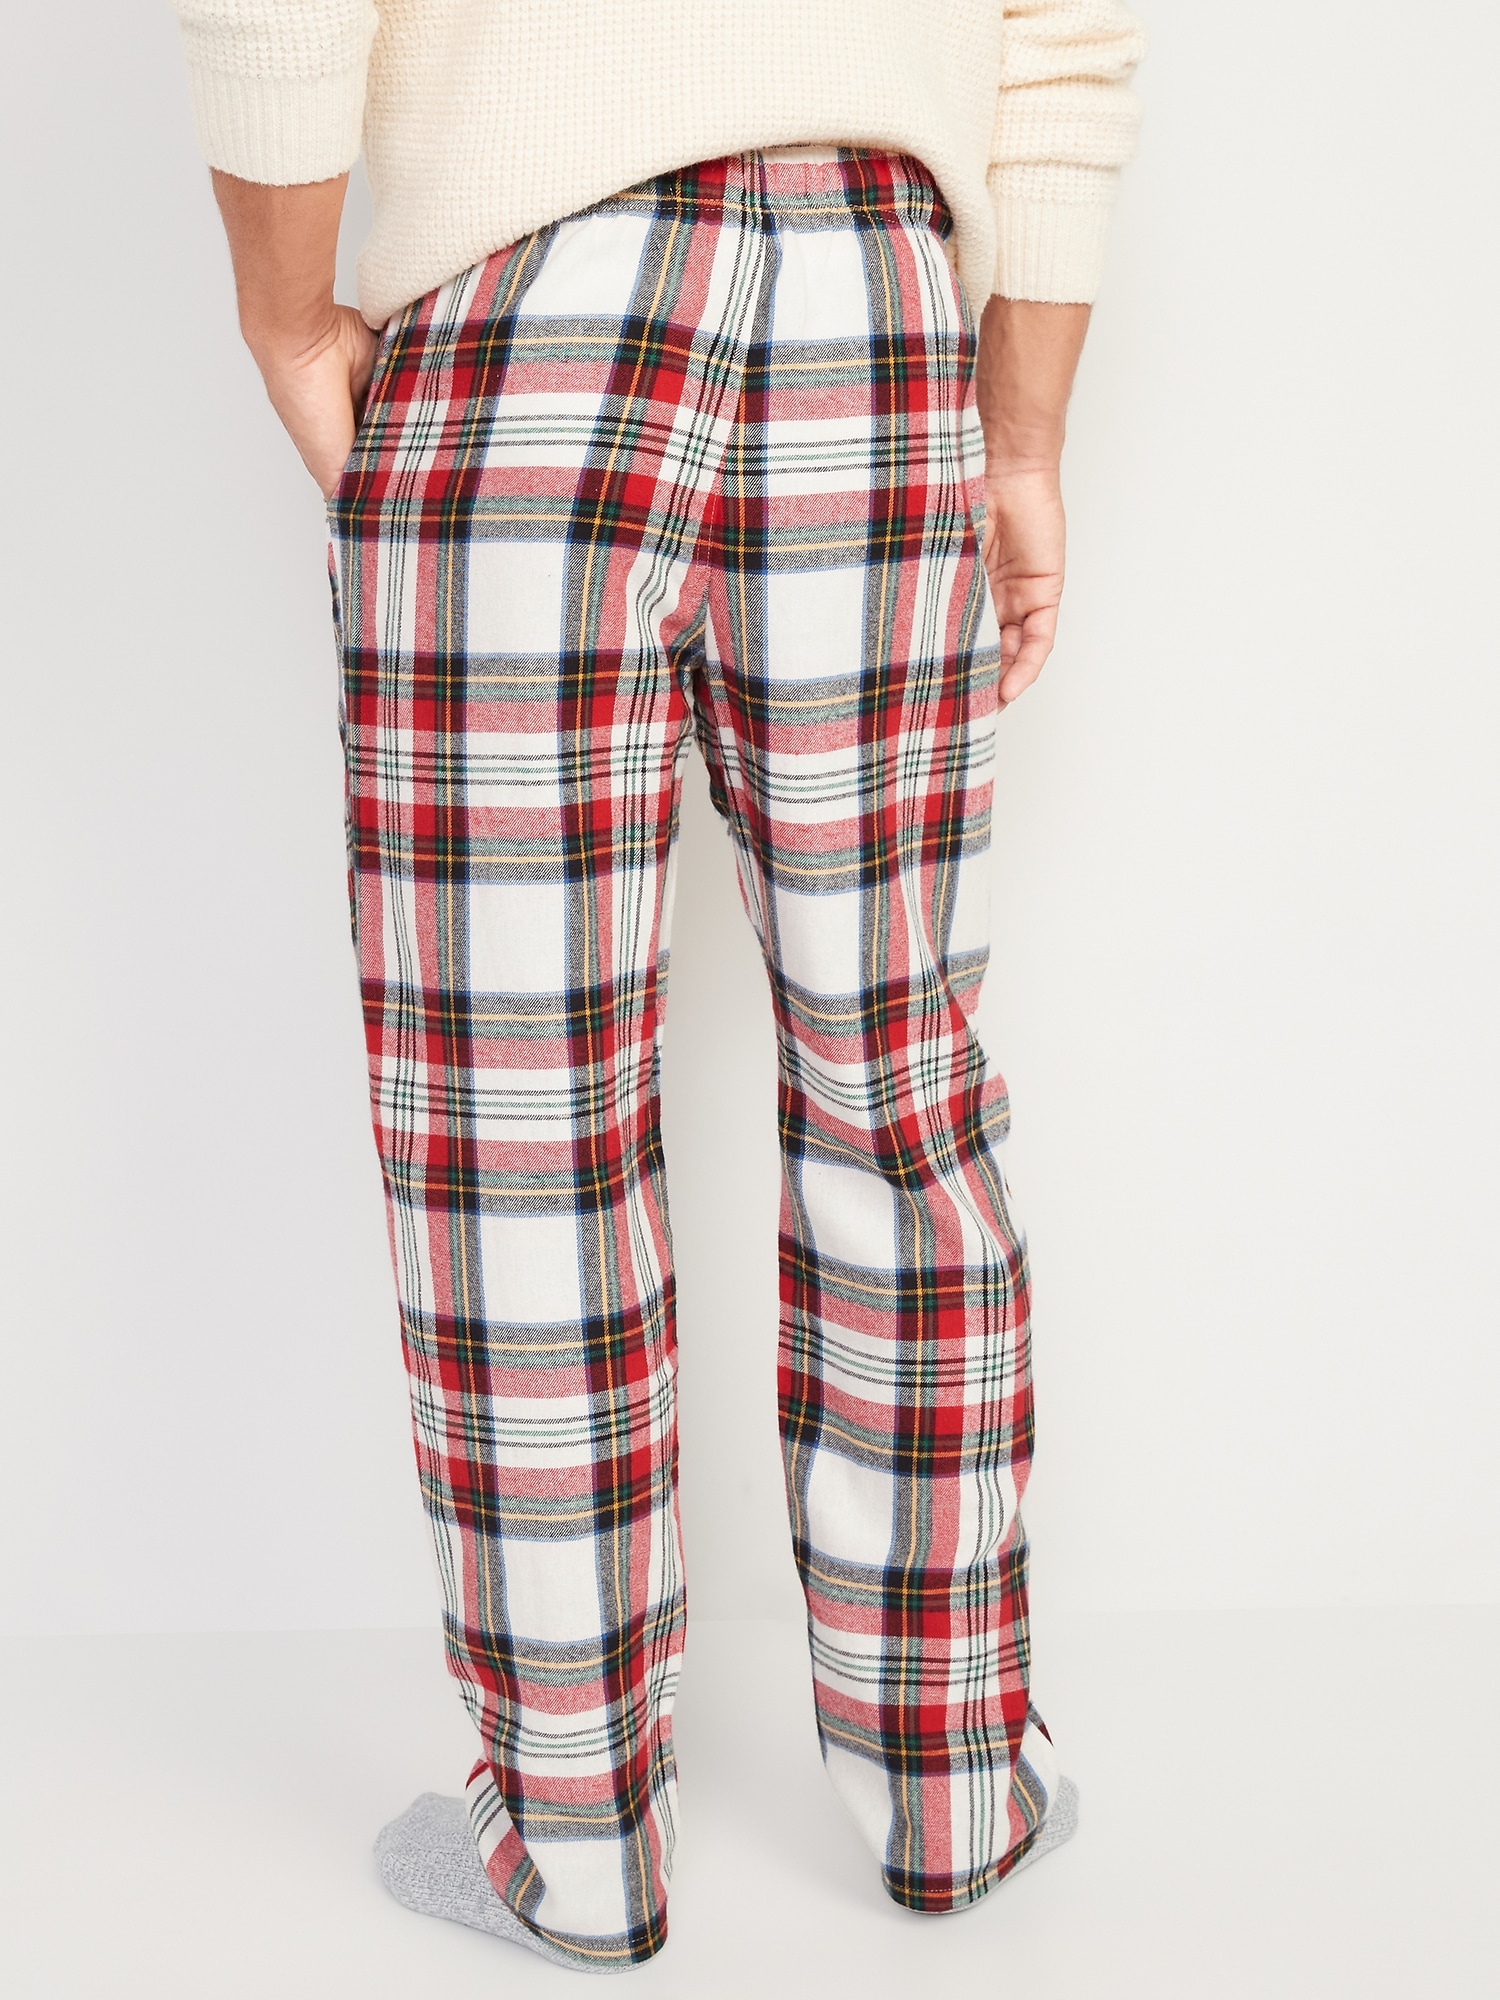 Mens Red And Green Plaid Pajama Pants | vlr.eng.br